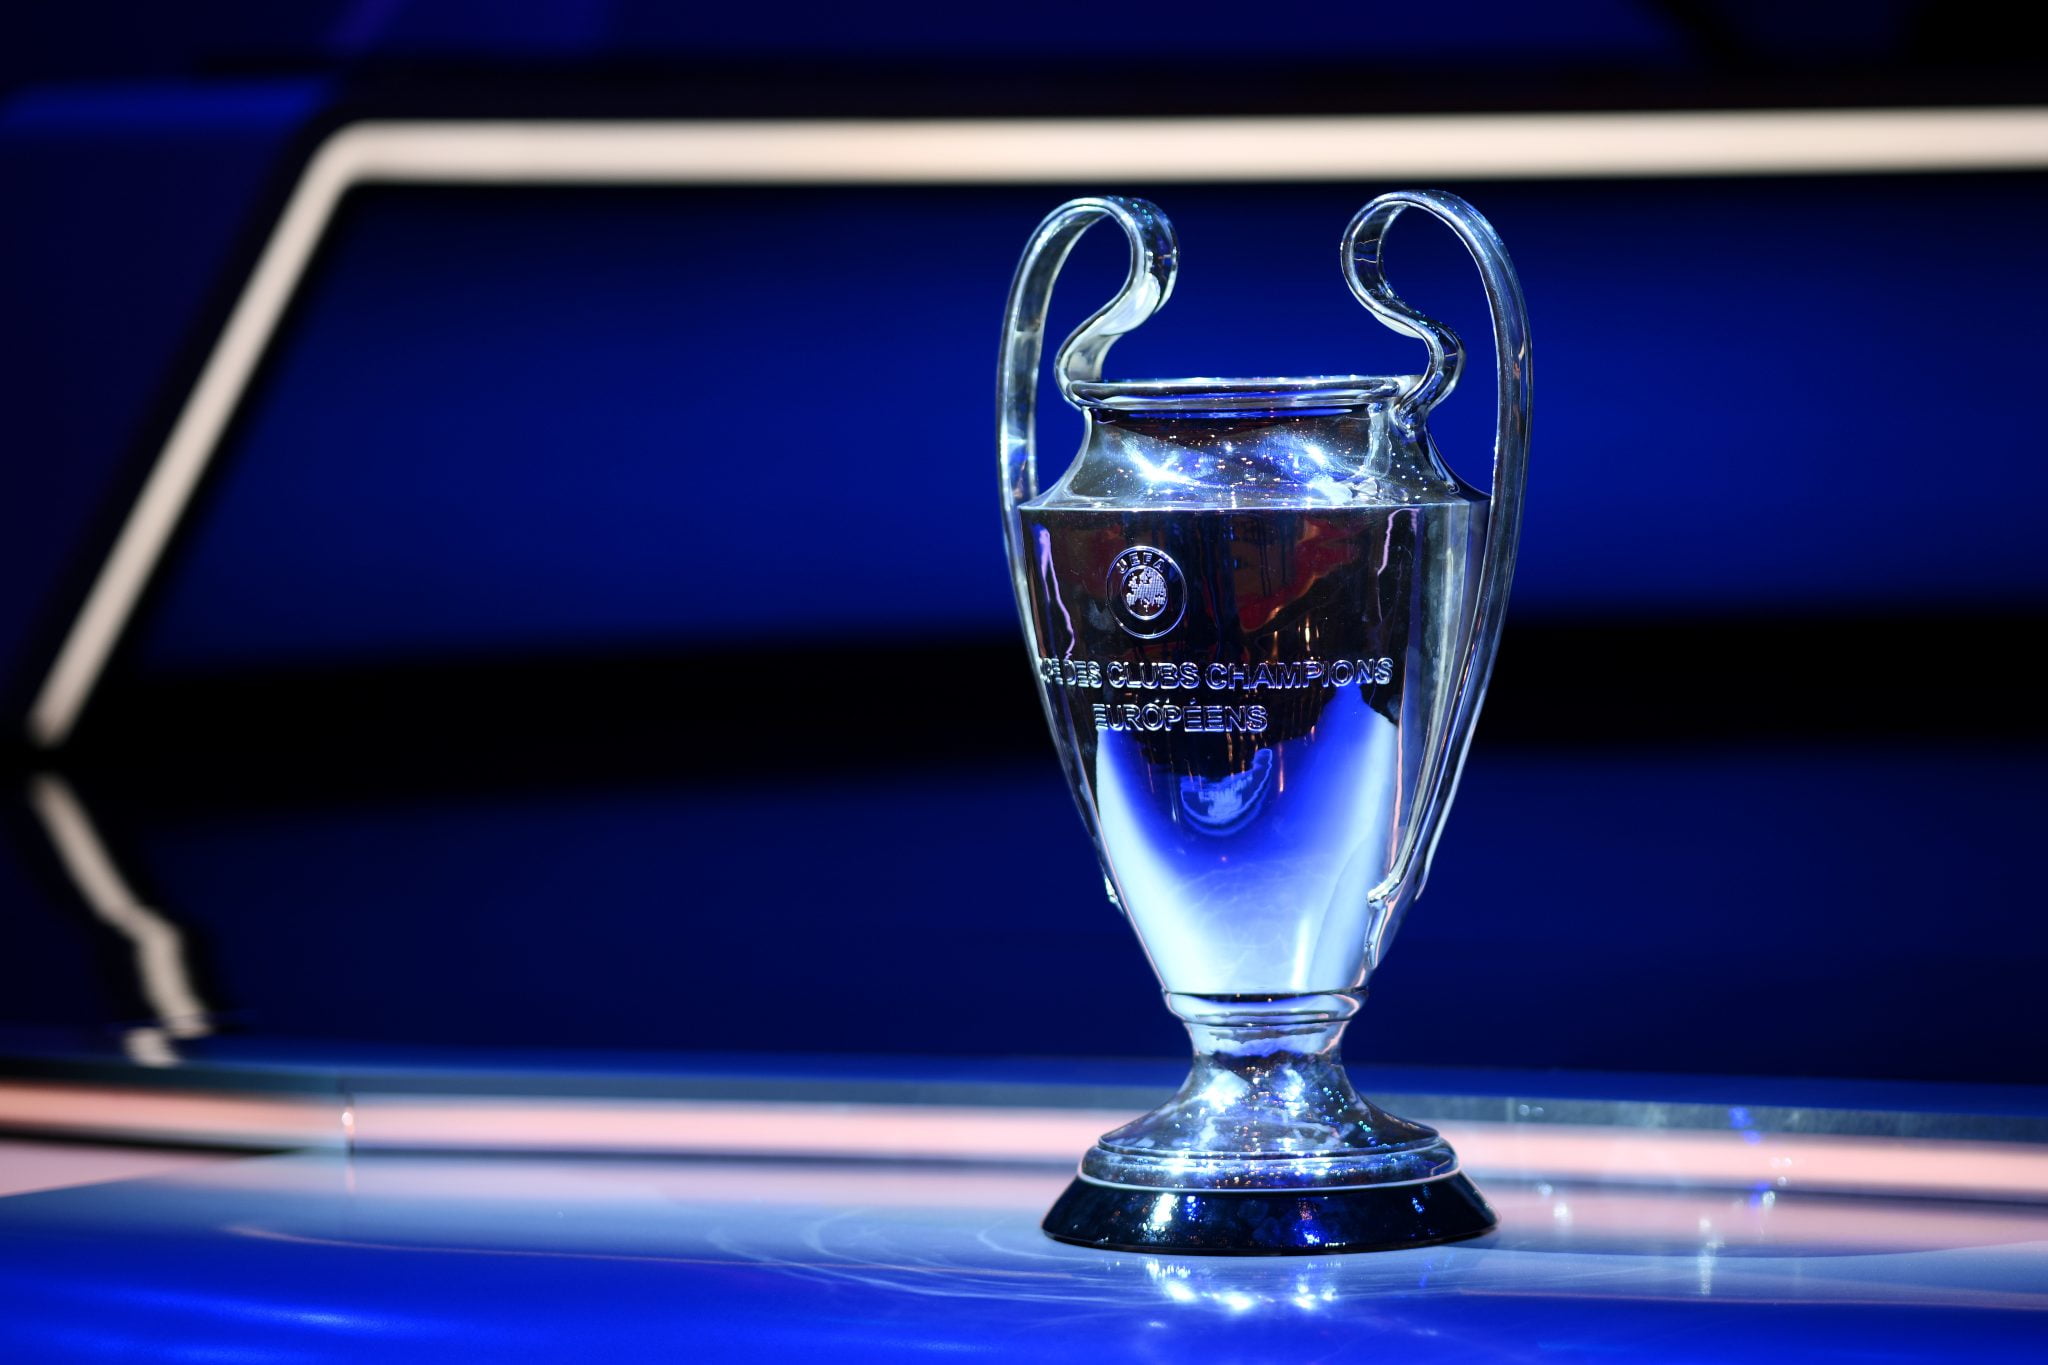 2023/2024 Champions League draw for the group stage is out